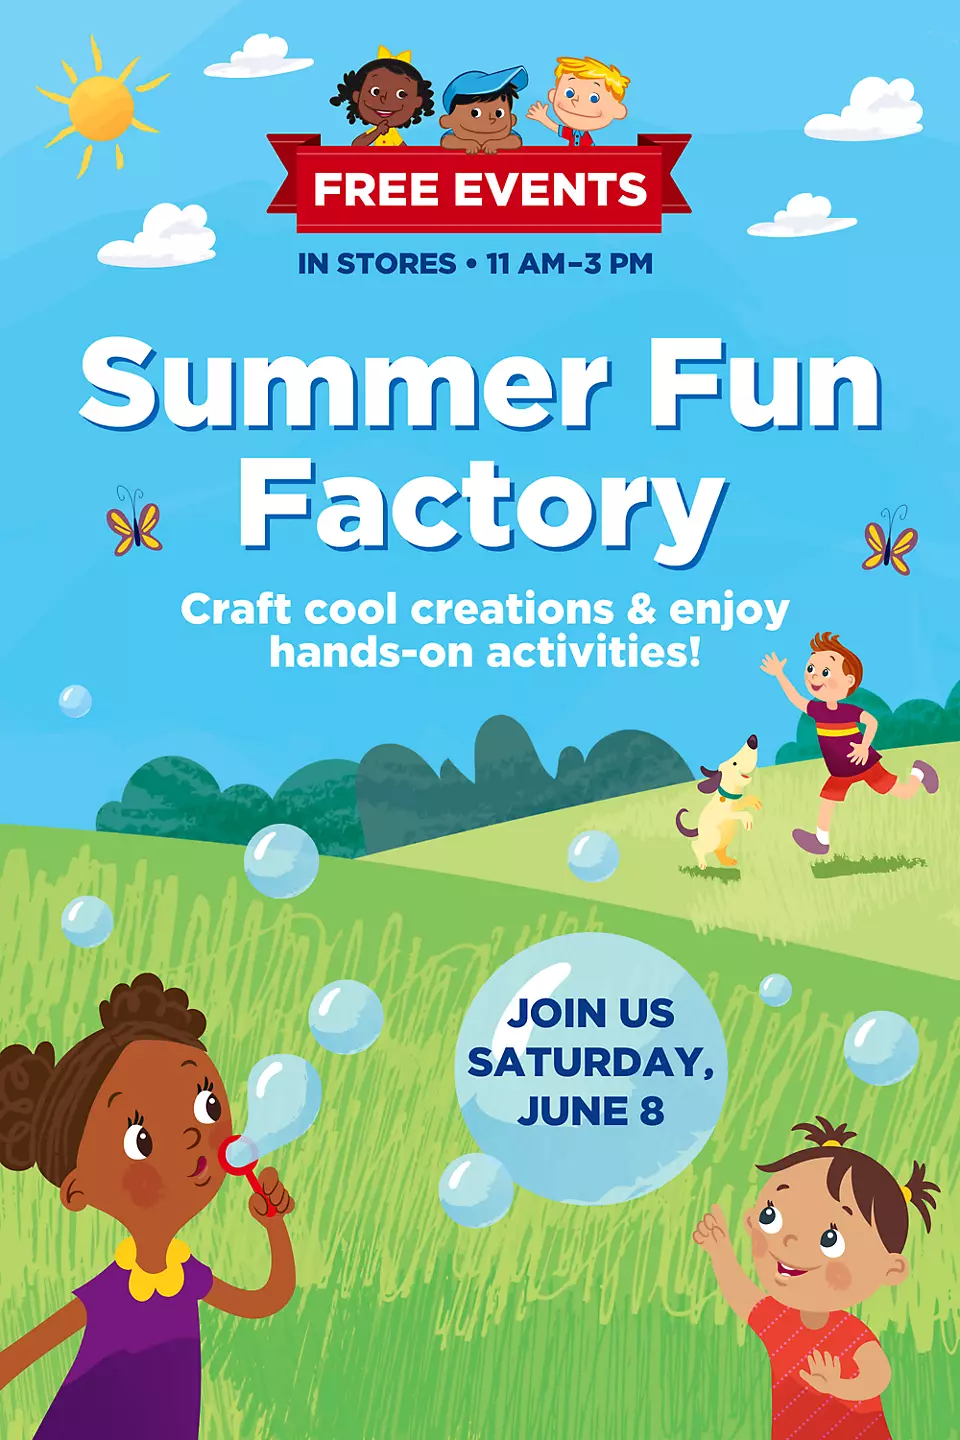 Craft cool creations and enjoy hands on activities at our free Summer Fun Factory event, Saturday, June 8, 11 a m to 3 p m.